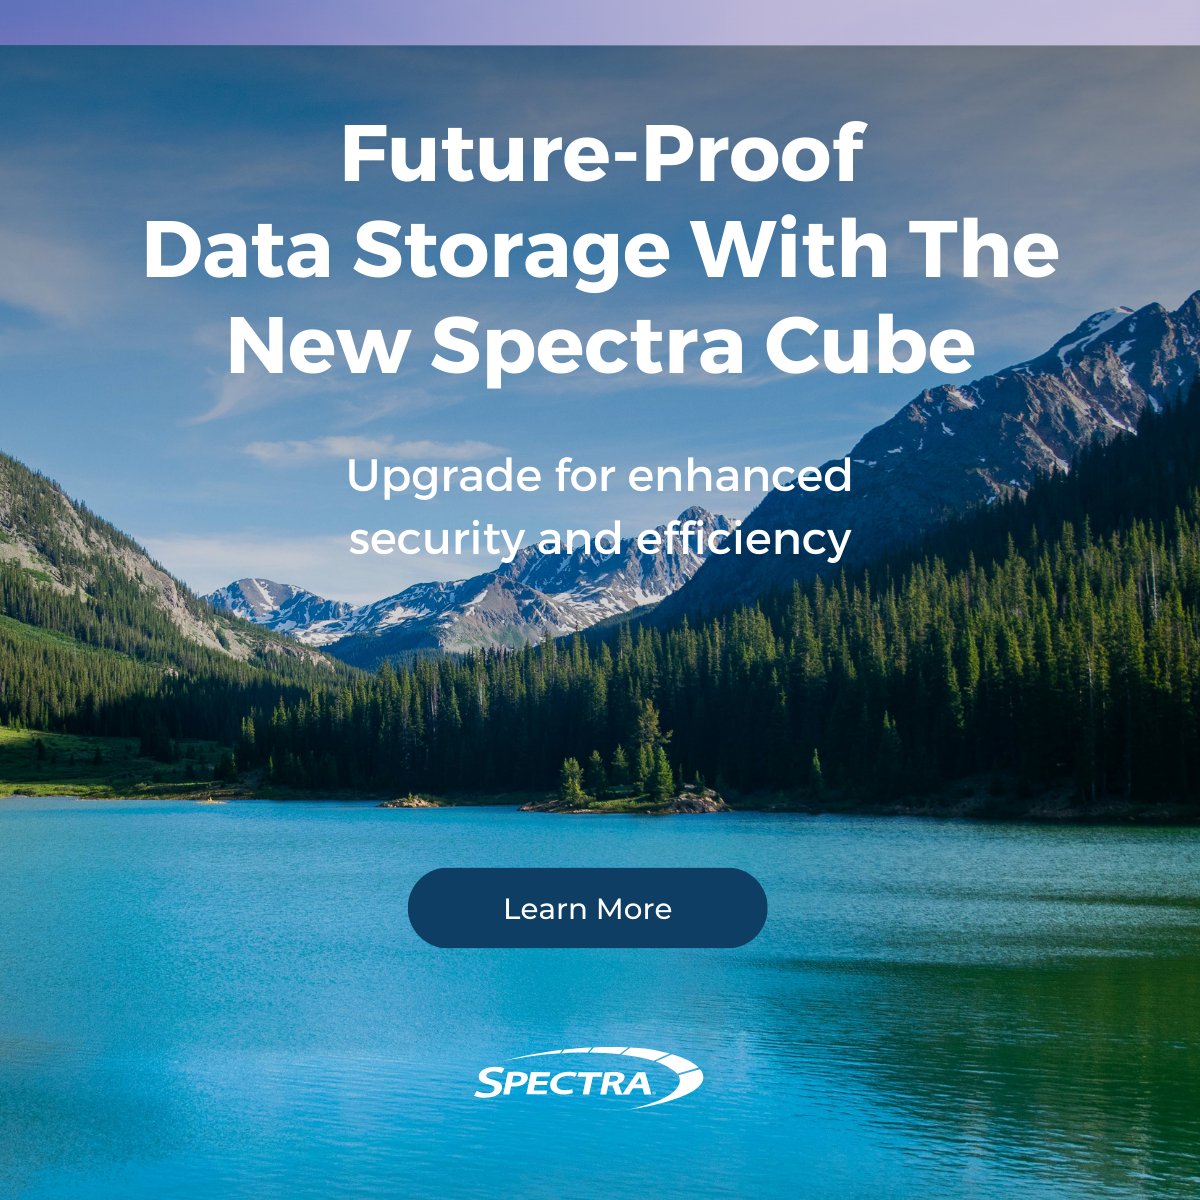 Future-proof long-term data storage with Spectra Cube! Effortlessly scale, fortify against cyber threats, and simplify management with LumOS UI. Upgrade now for enhanced security and efficiency! #TapeStorage #DataSecurity sl.spectralogic.com/44bsKvz